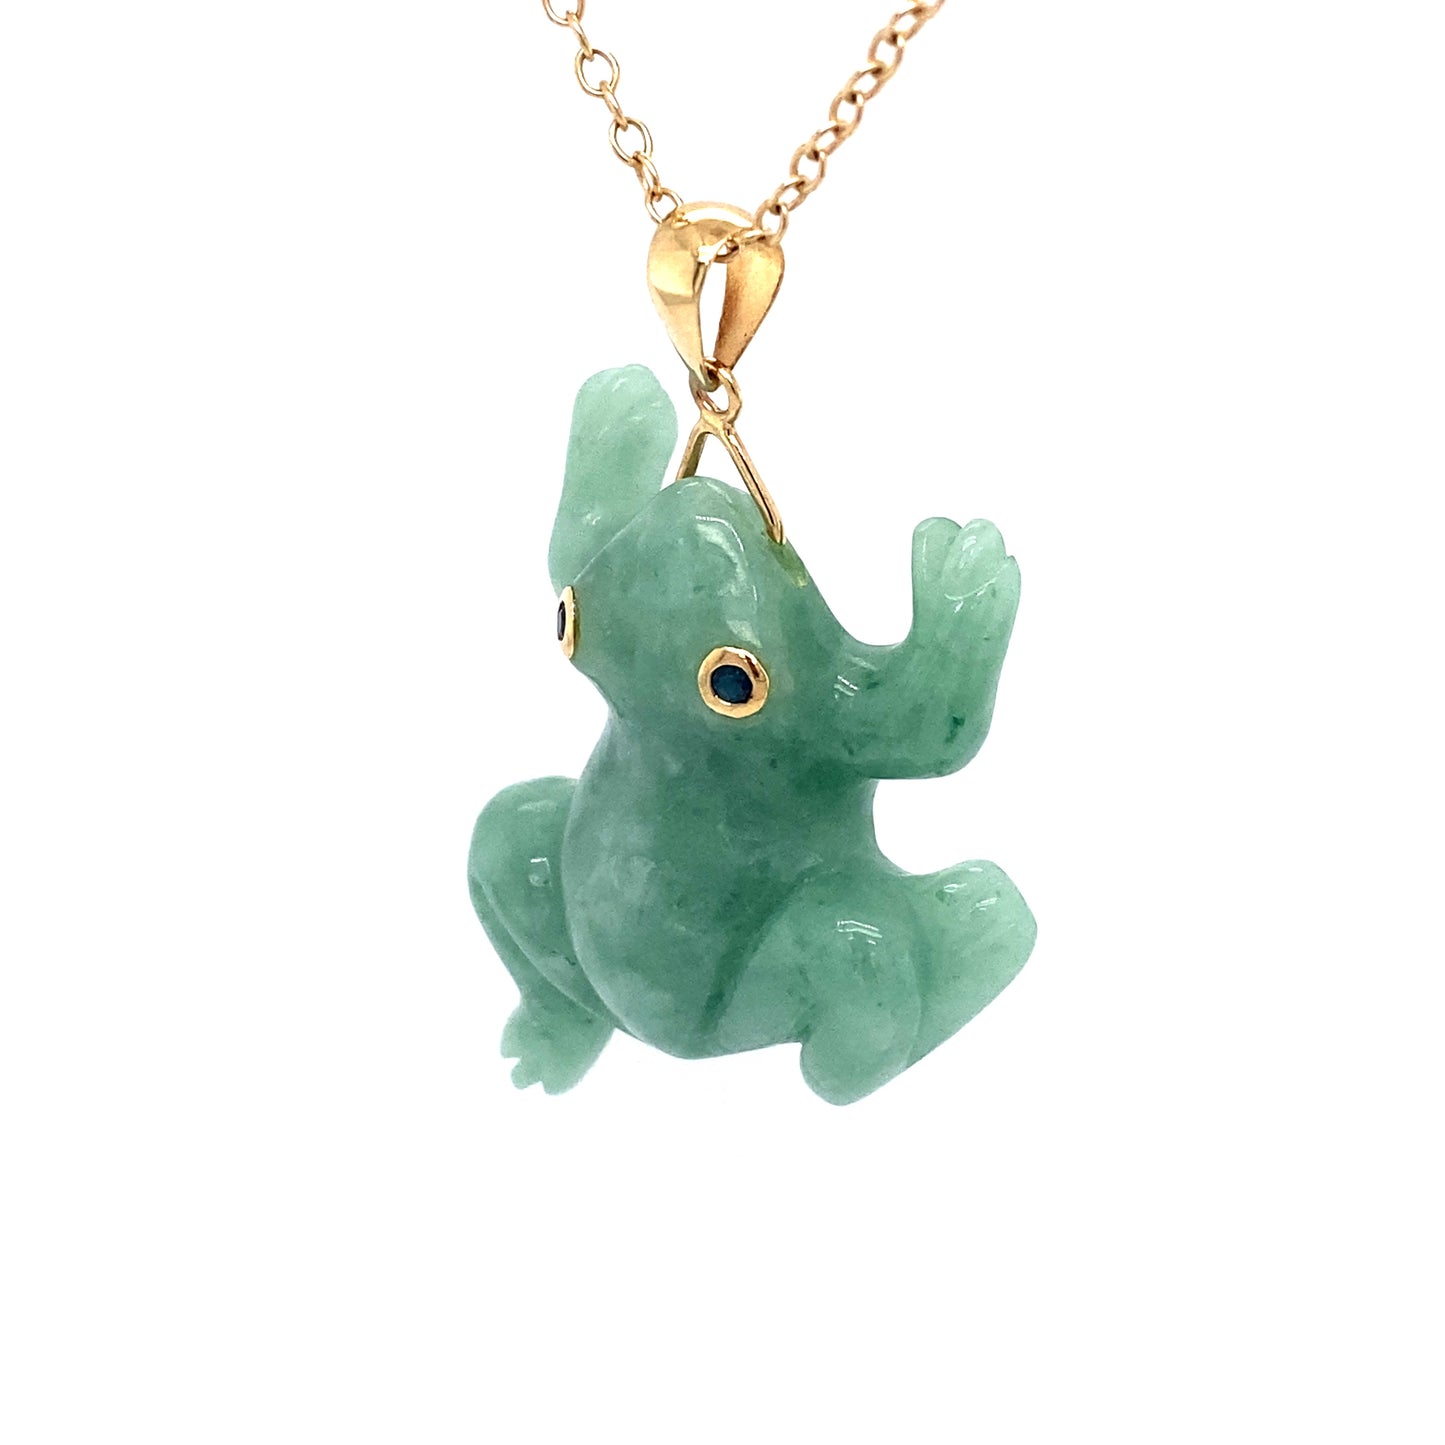 Circa 1980 Green Jade Frog Pendant with Sapphire Eyes in 14K Gold